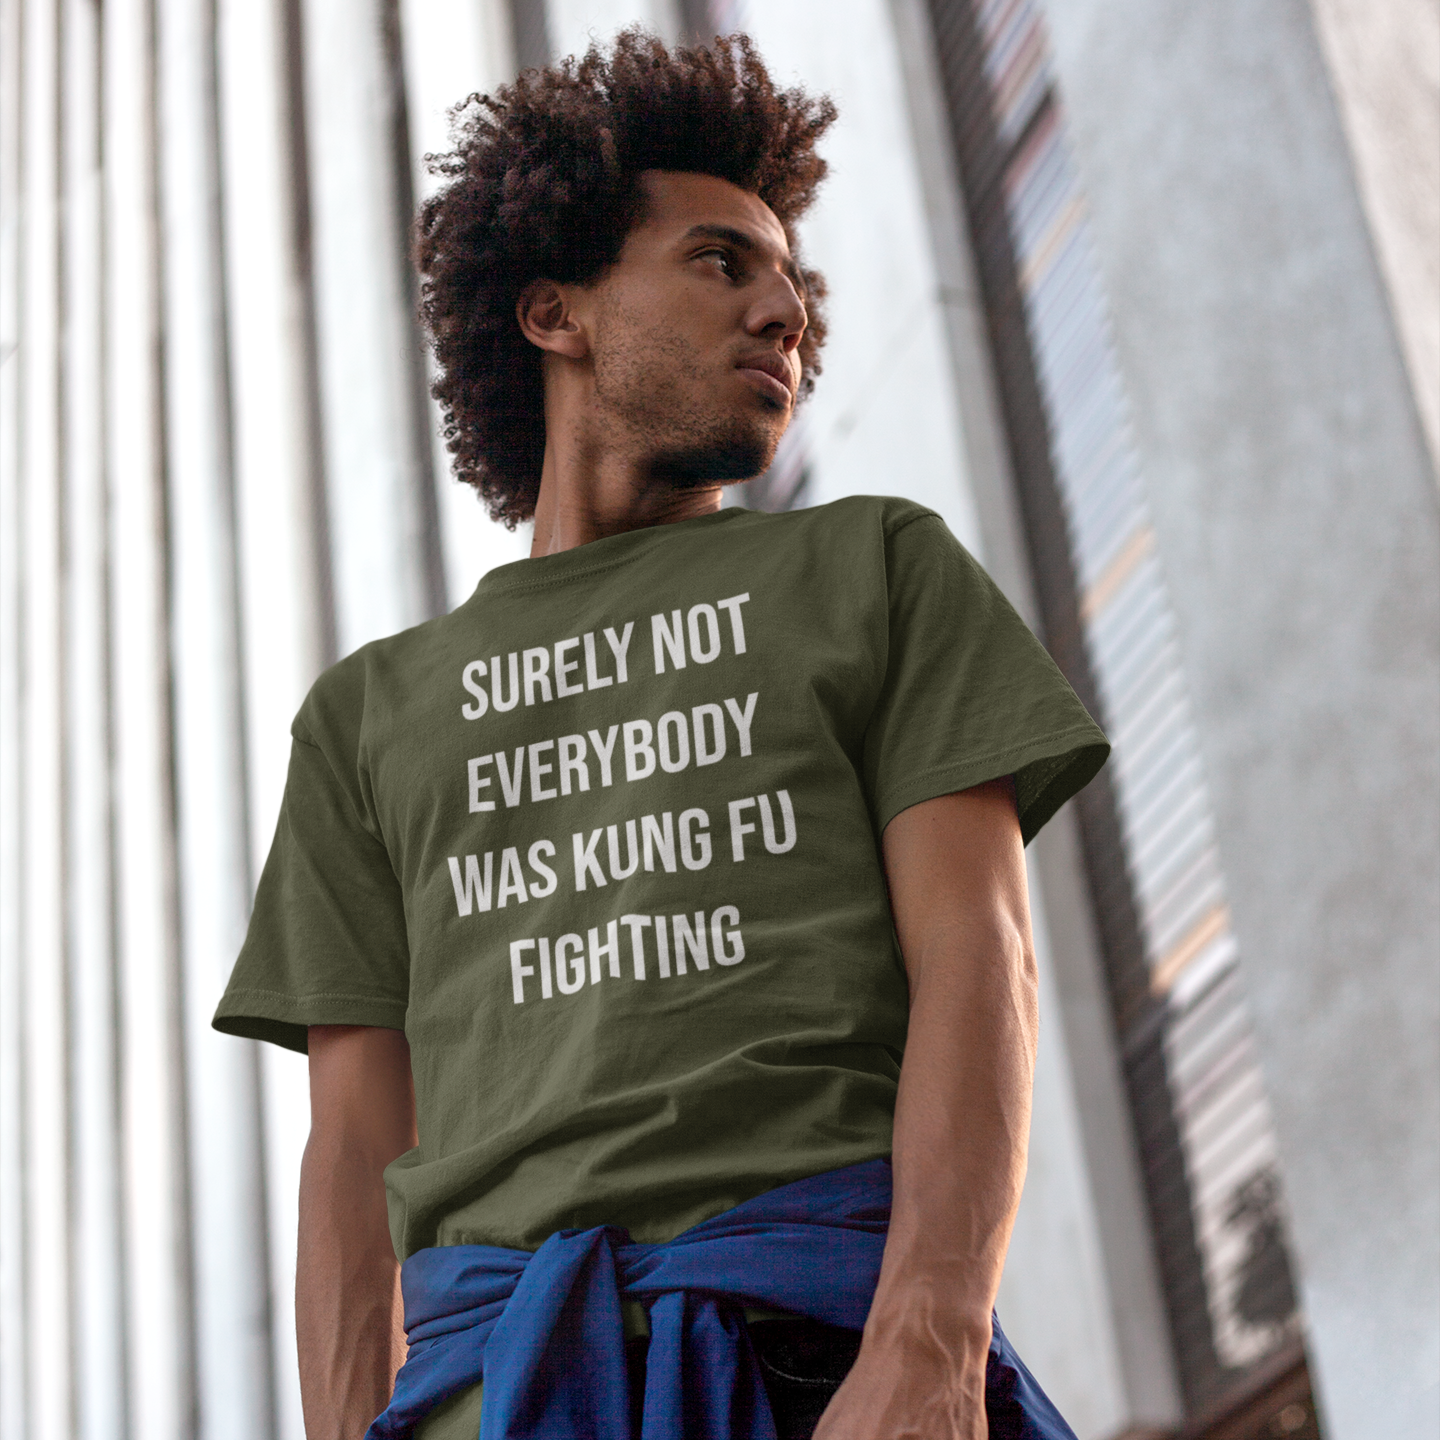 'Surely not everybody was kung fu fighting' adult shirt